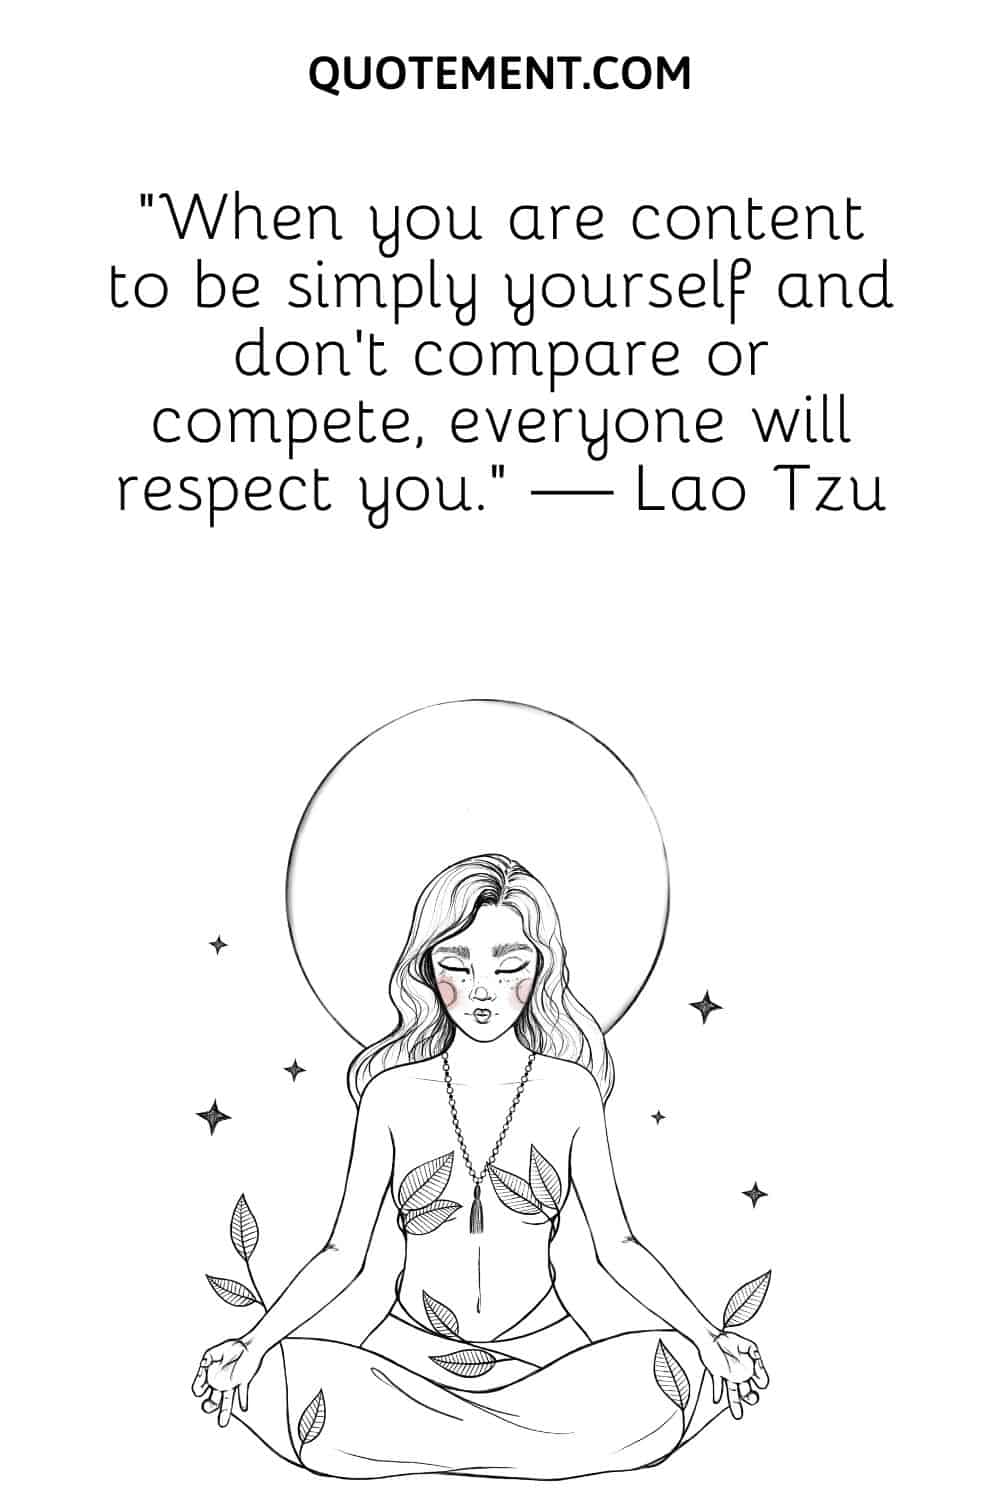 When you are content to be simply yourself and don’t compare or compete, everyone will respect you